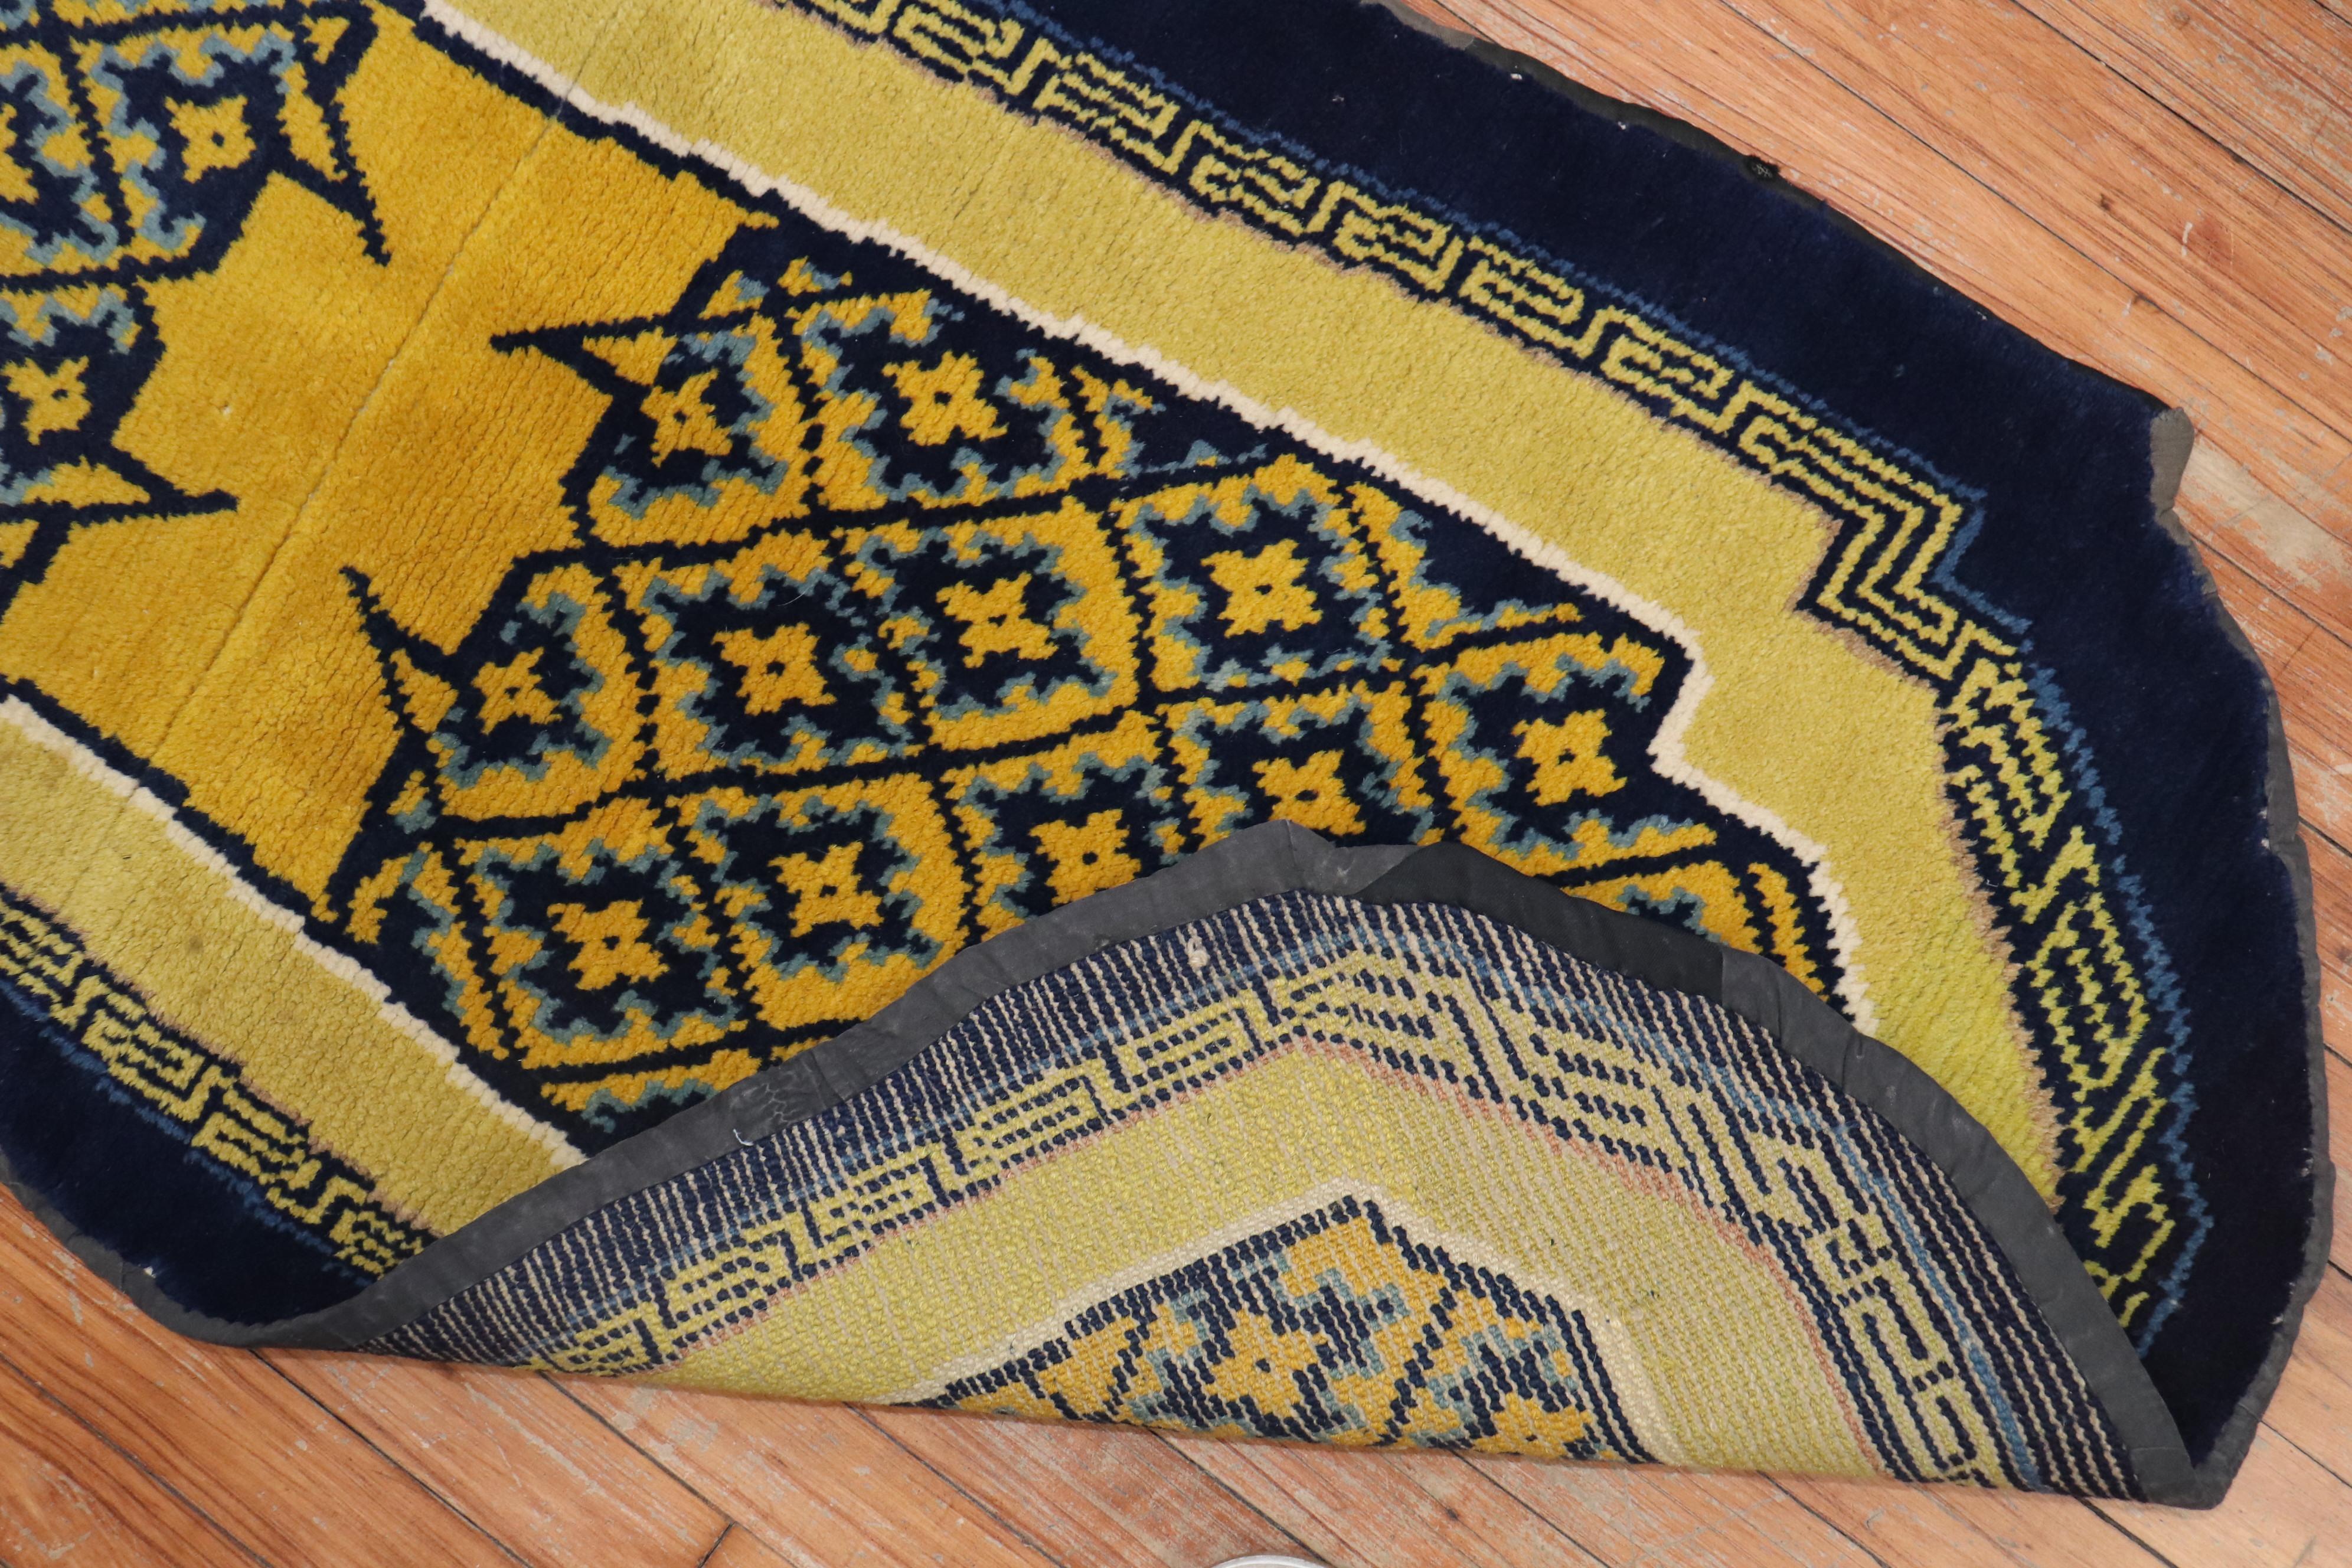 An early 20th century Tibetan horse cover textile rug in blue and yellow,

circa 1900, measures: 2'1